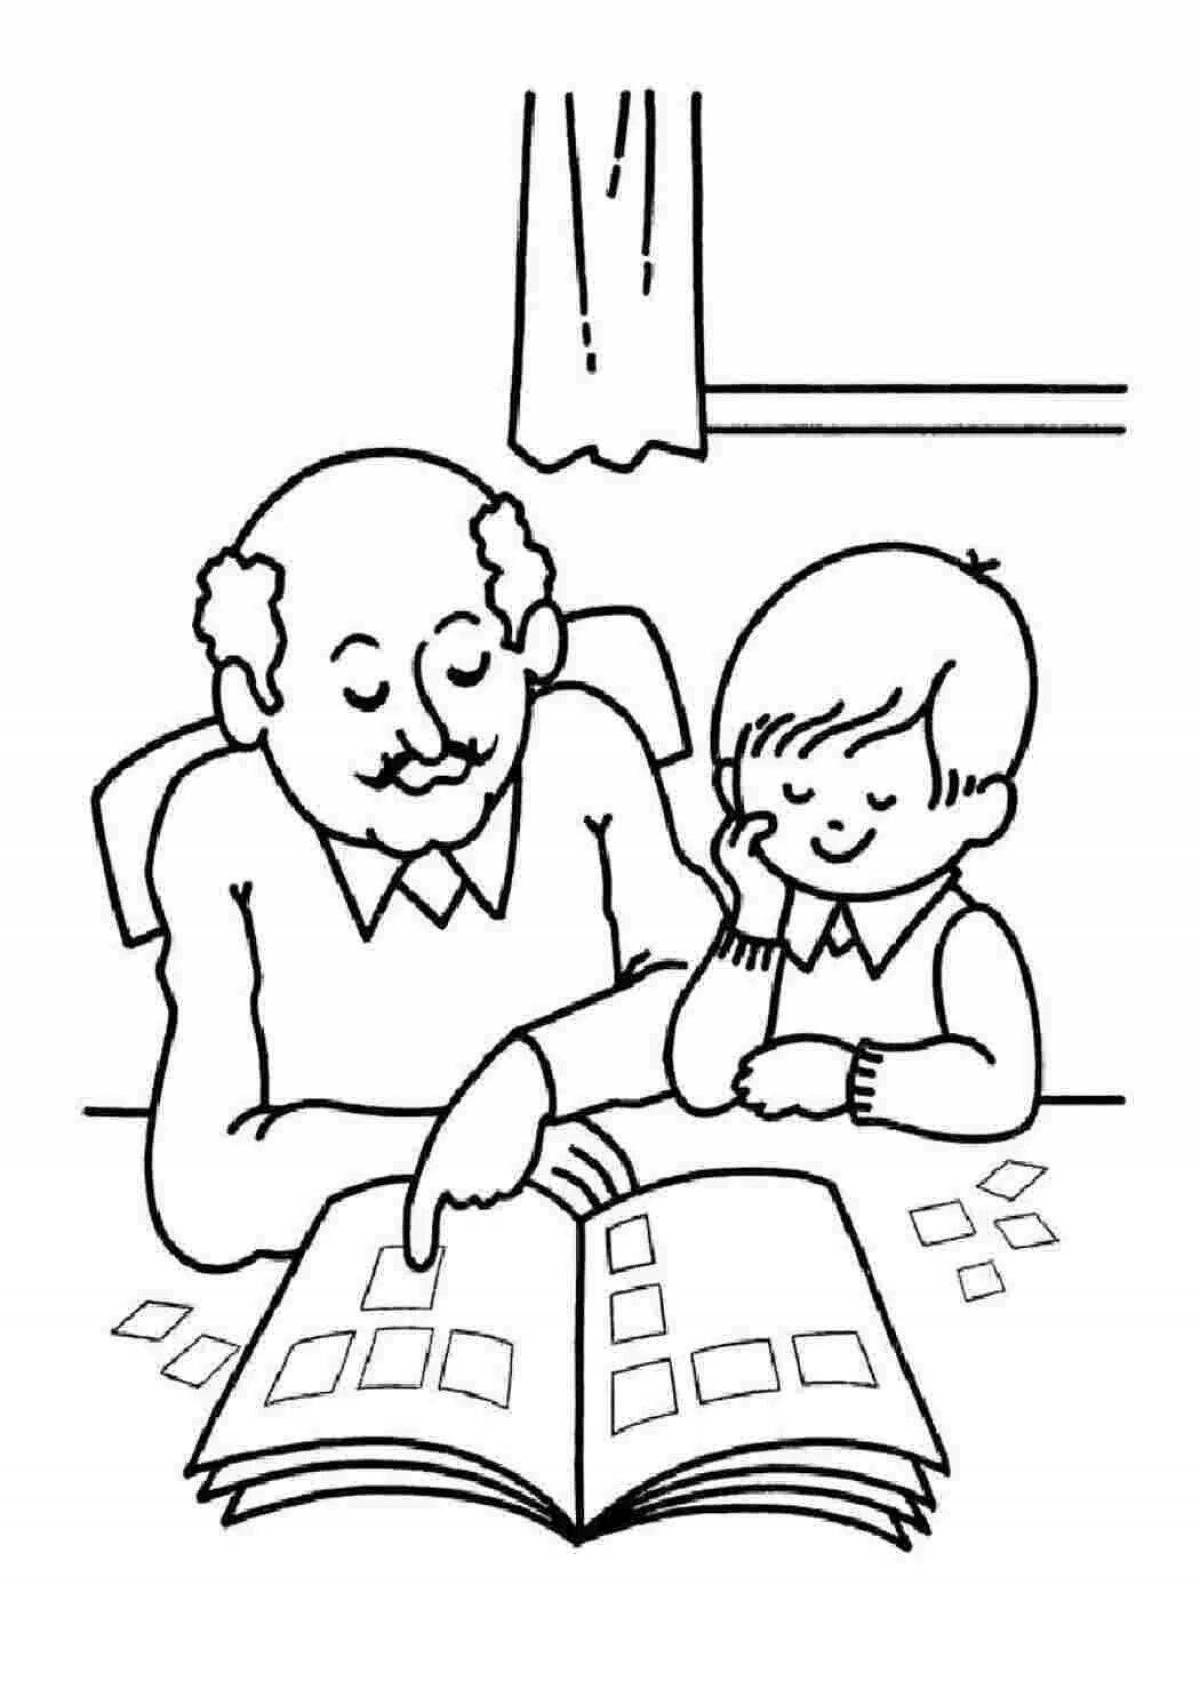 Coloring book exuberant grandfather for his birthday from granddaughter